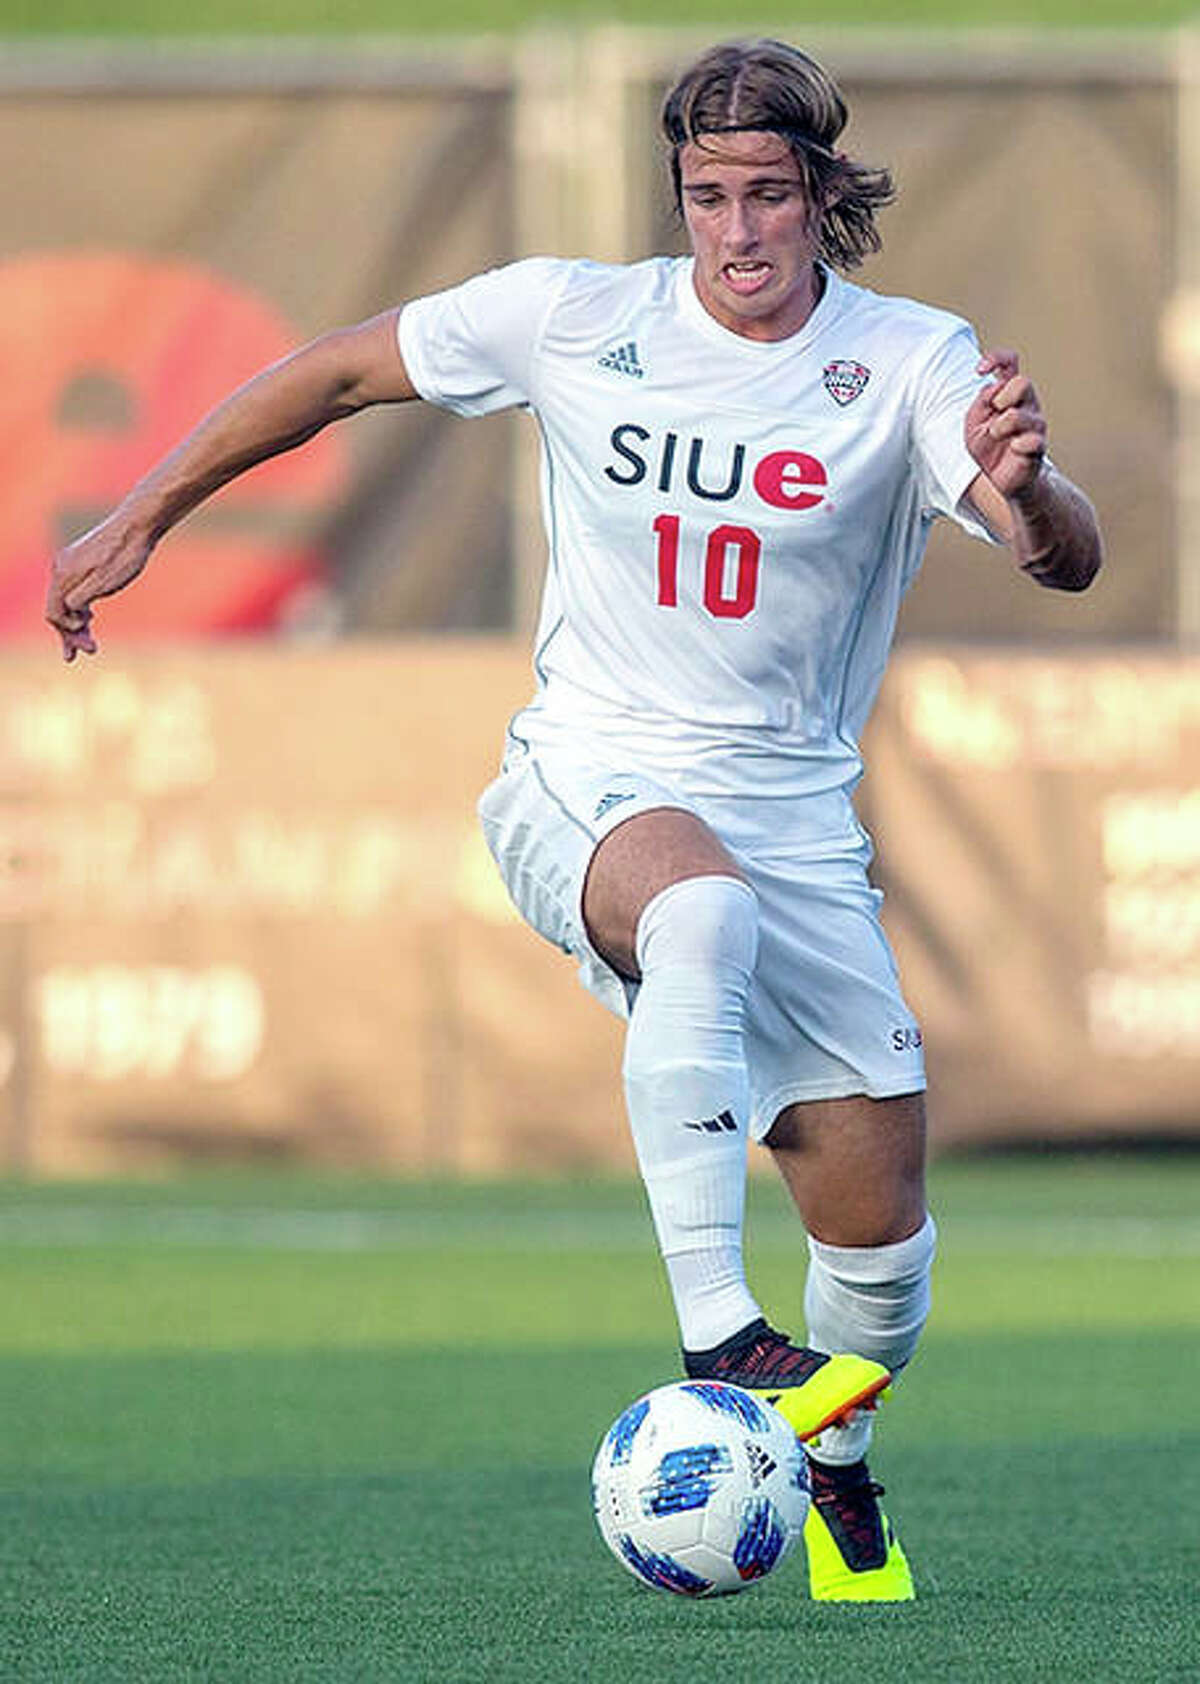 SIUE’s Jorge Gonzalez scored in the 79th minute Tuesday to send the Cougars to a 1-0 win over UMKC Tuesday in Kansas City.